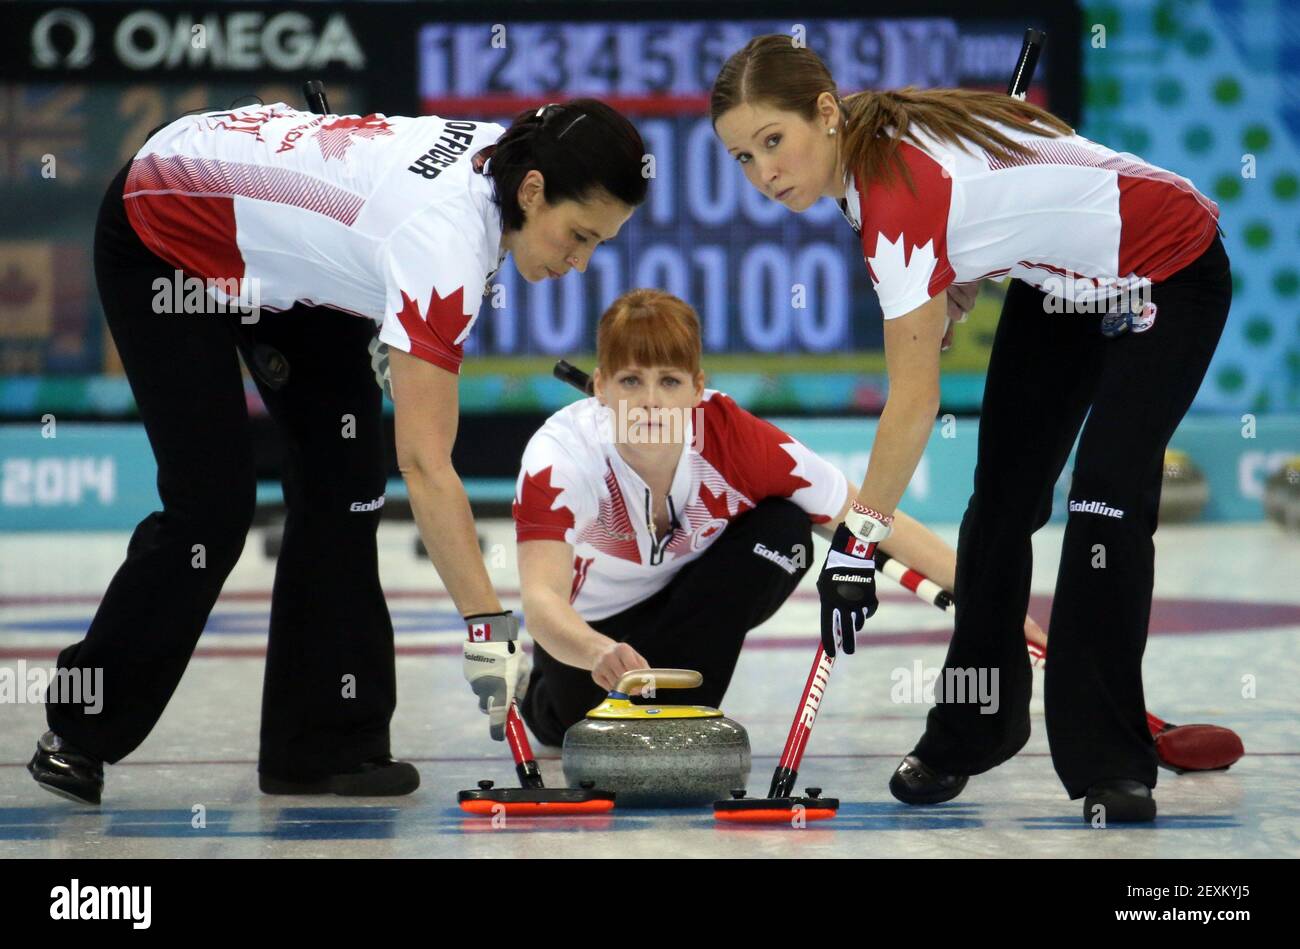 Canada's Jill Officer (left to right), Dawn McEwen and Kaitlyn Lawes throw during their victory over Great Britain in the women's curling semifinals at the Ice Cube Curling Center during the Winter Olympics in Sochi, Russia, Wednesday, Feb. 19, 2014. (Photo by Brian Cassella/Chicago Tribune/MCT/Sipa USA) Stock Photo